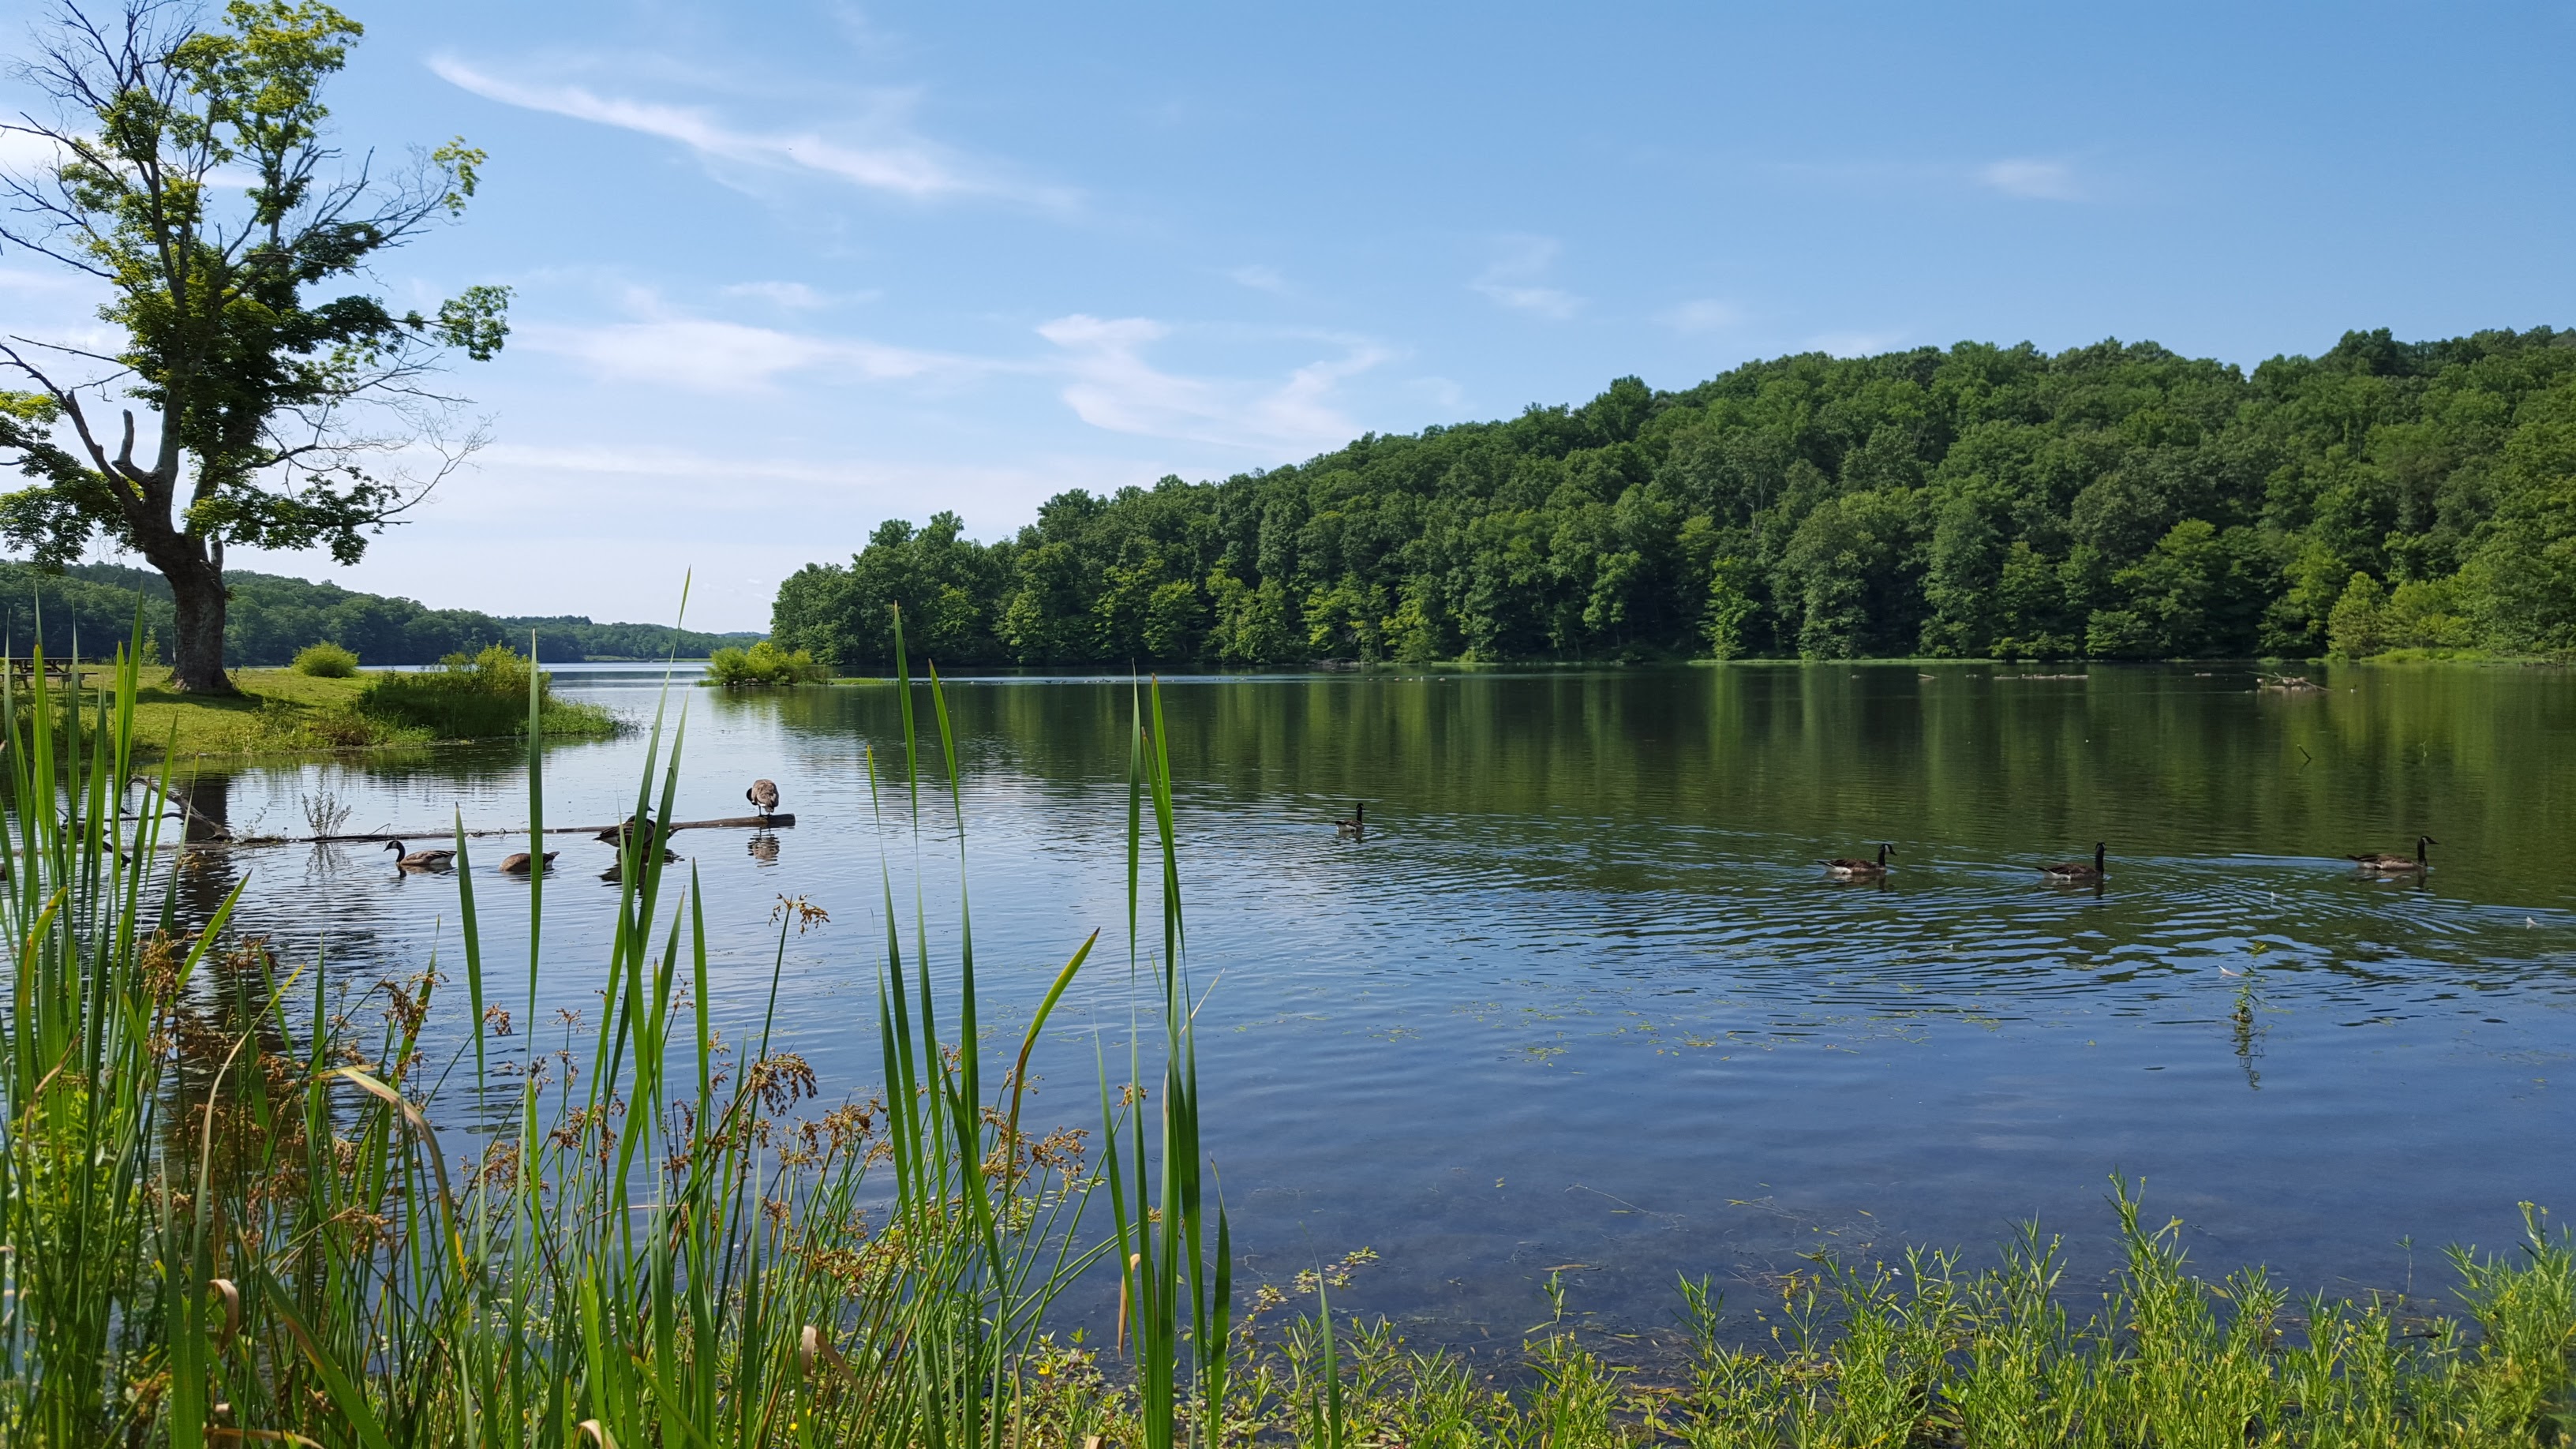 Yellowwood Lake, Yellowwood State Forest, Monroe County, Indiana. June 15, 2016. Photographed by Vanessa M. Snyder.